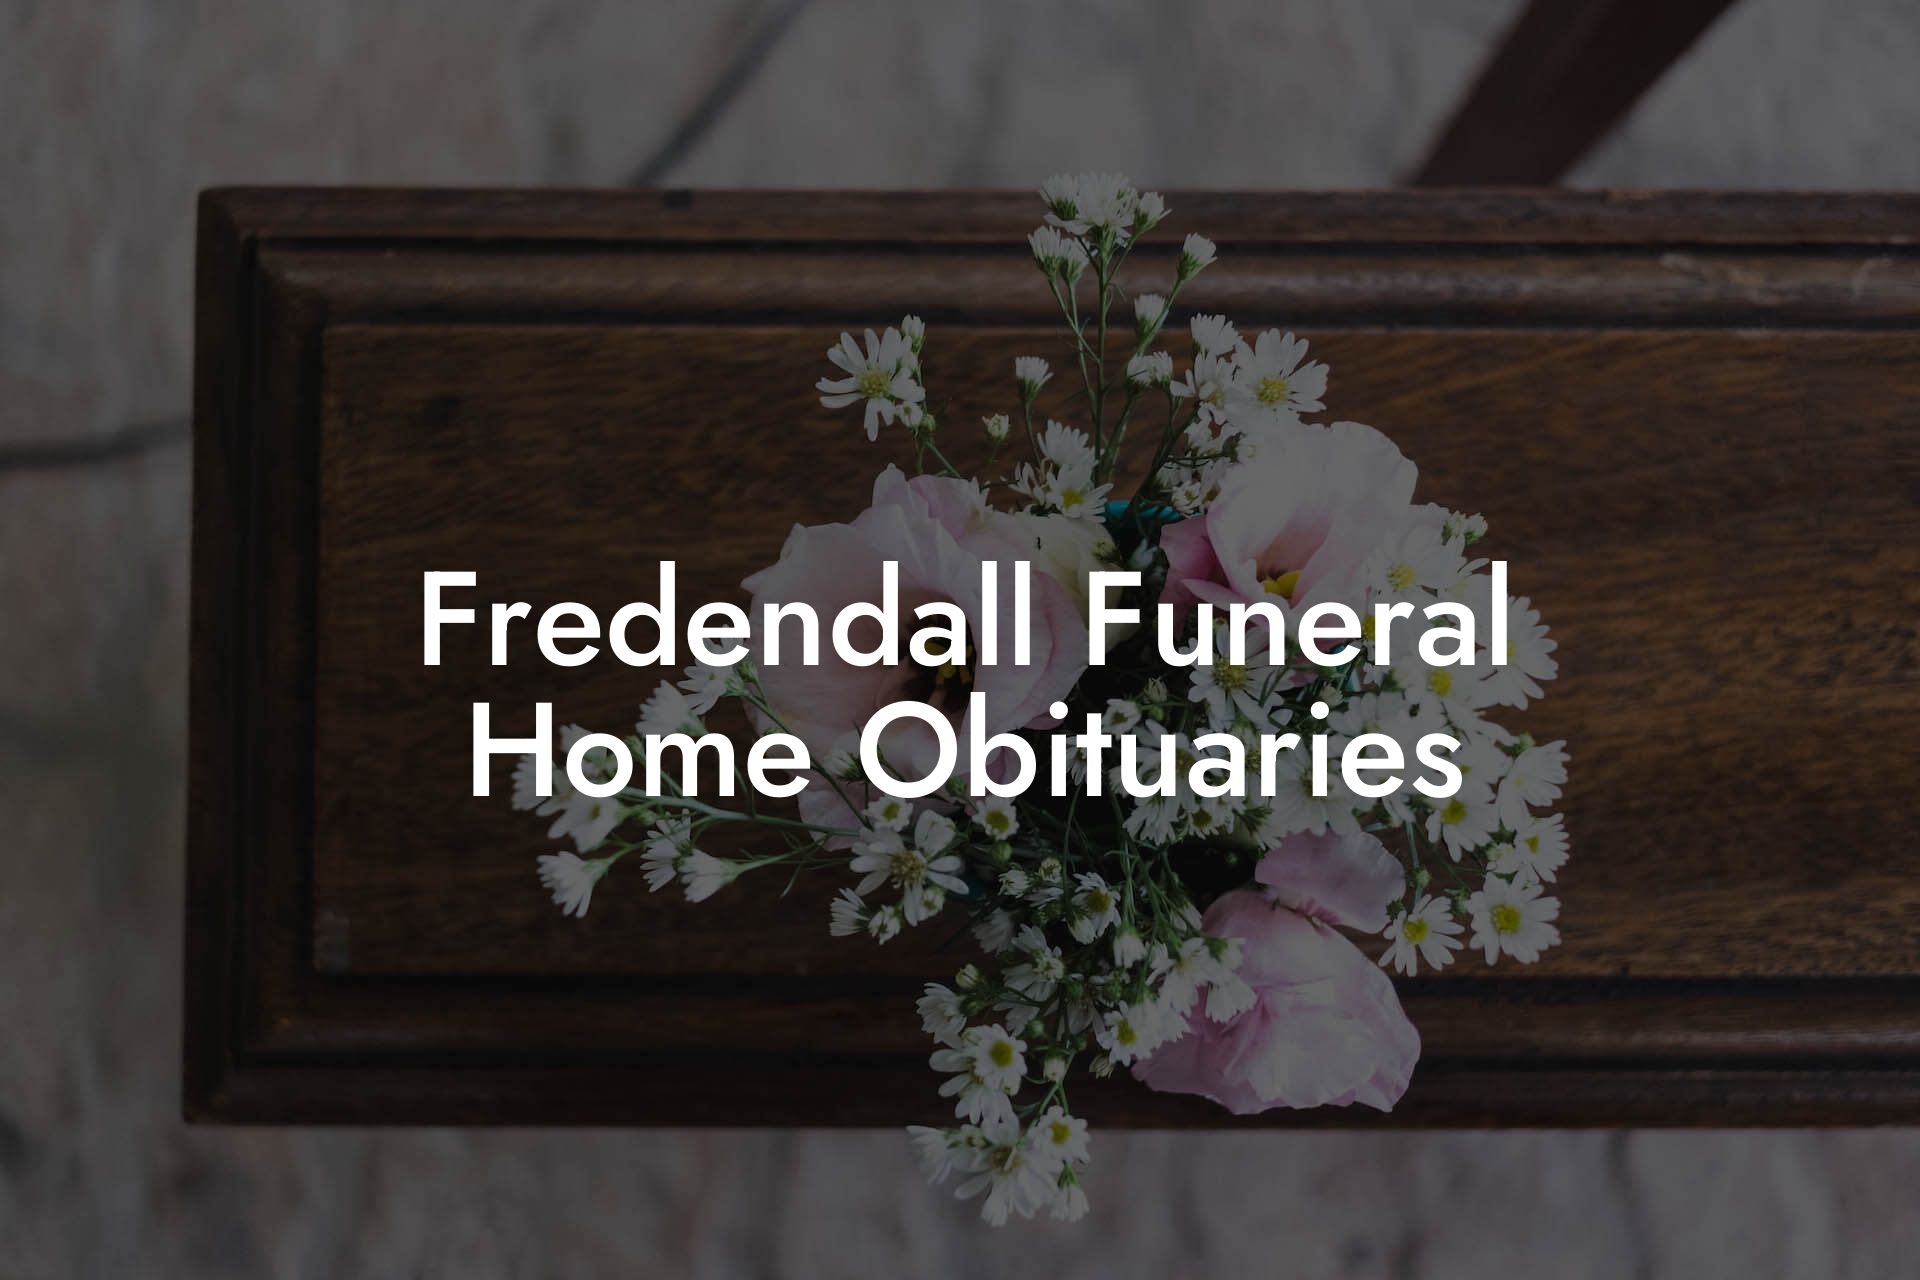 Fredendall Funeral Home Obituaries